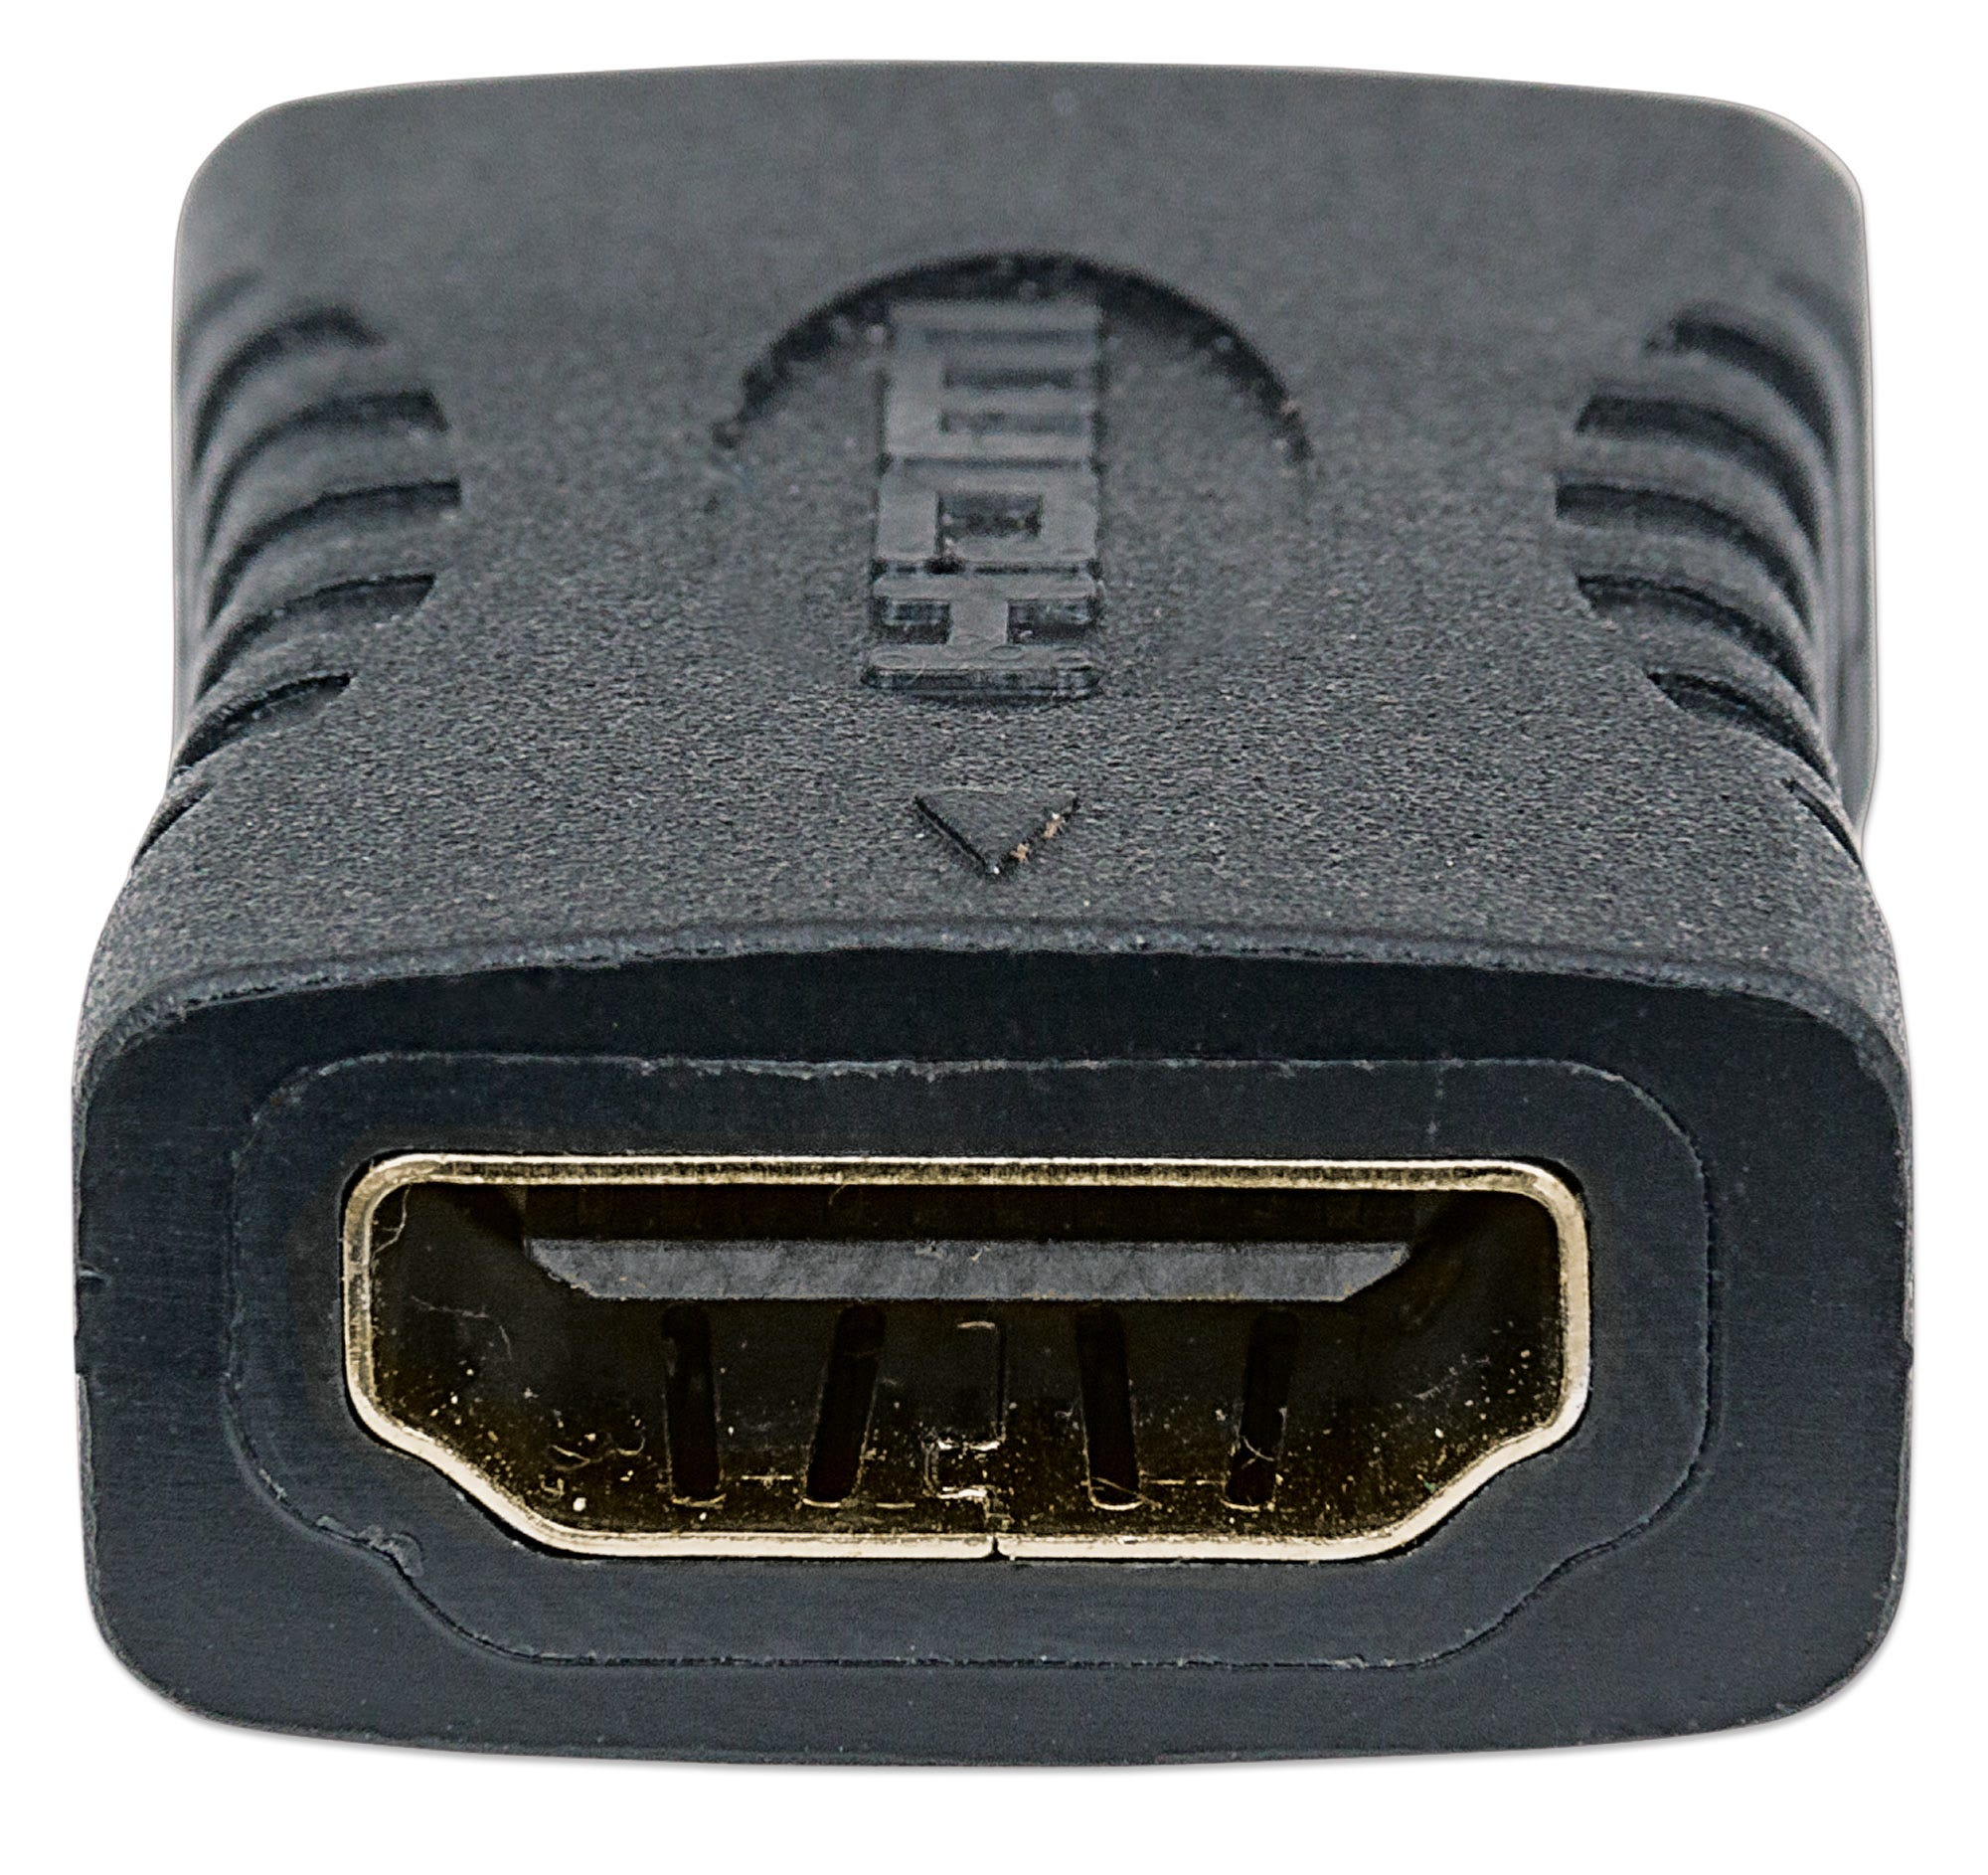 Manhattan HDMI Coupler, 4K@60Hz (Premium High Speed), Female to Female, Straight Connection, Black, Ultra HD 4k x 2k, 10.2 Gbps, ARC, 3D, Deep Colour, Fully Shielded, Gold Plated Contacts, Lifetime Warranty, Polybag